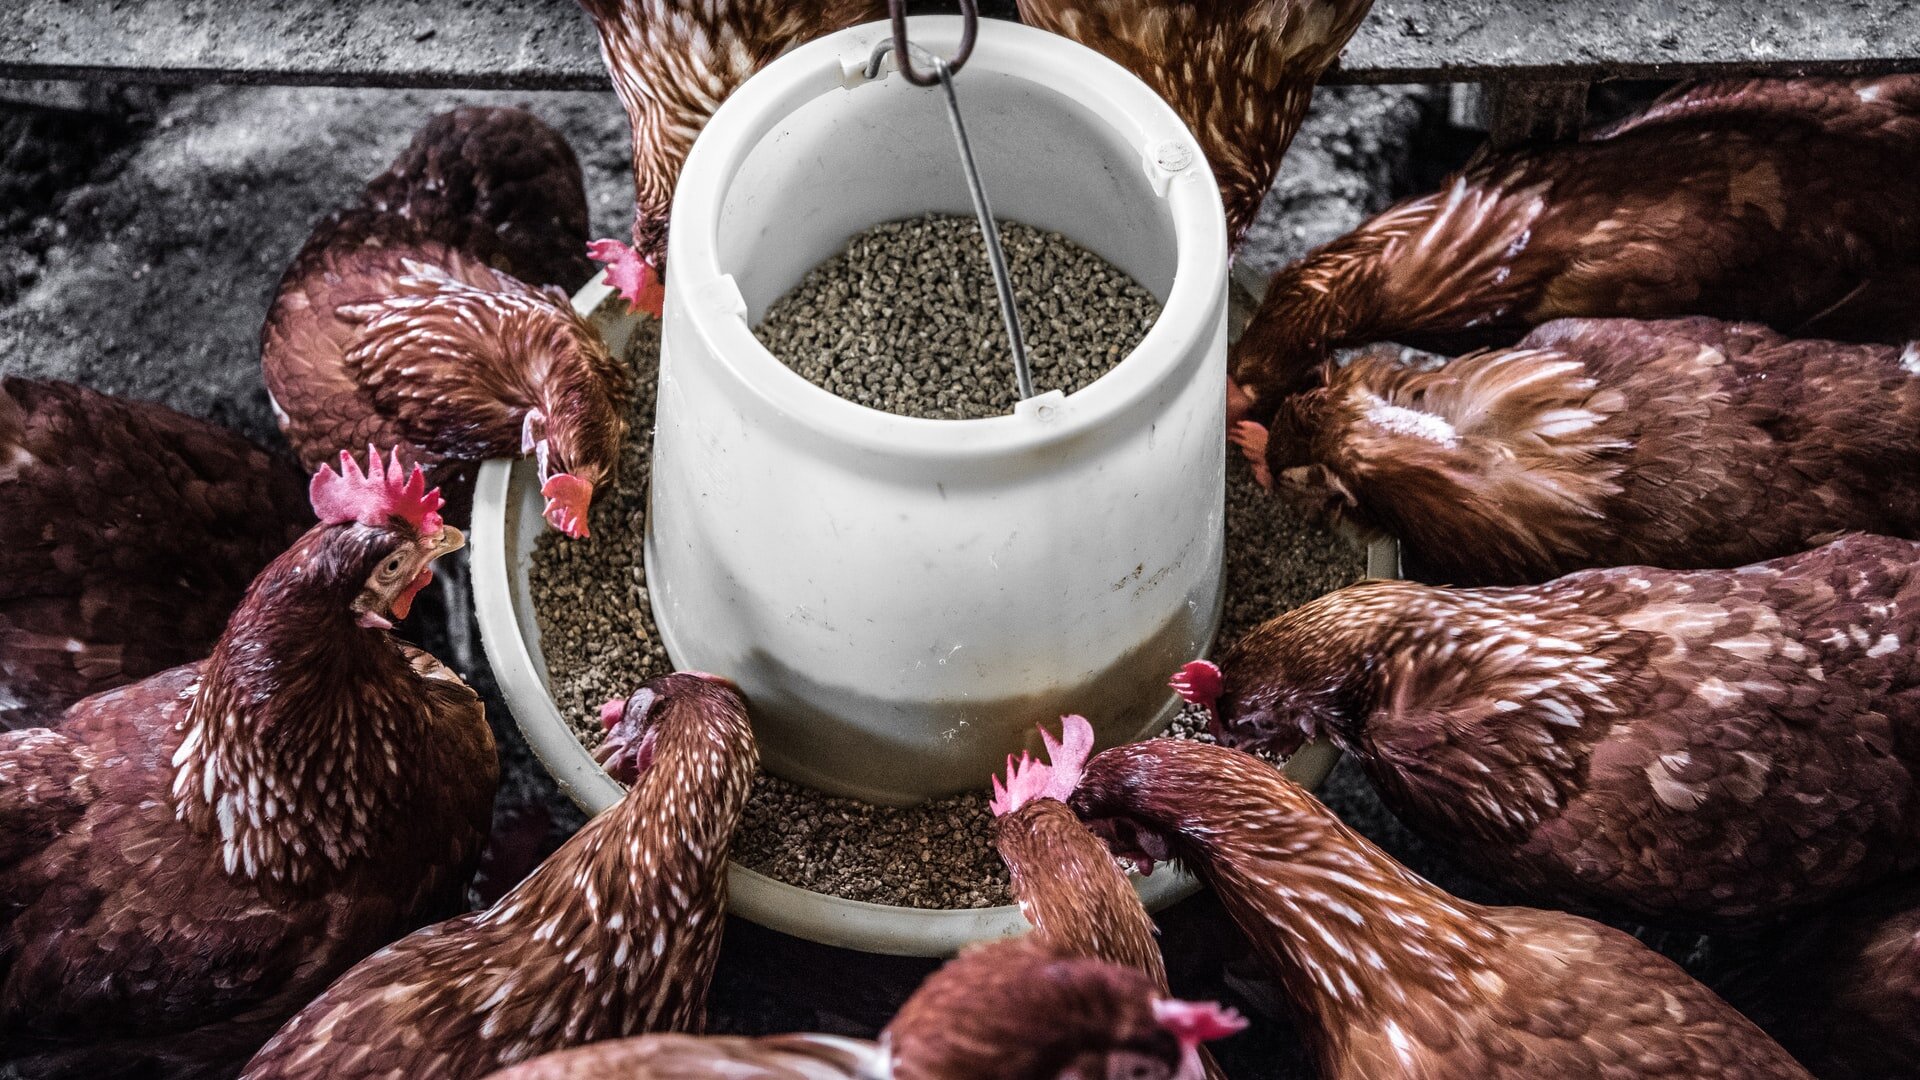 Roosters eating pellet feed out of a circular trough. Image credit: Arisa Chattasa